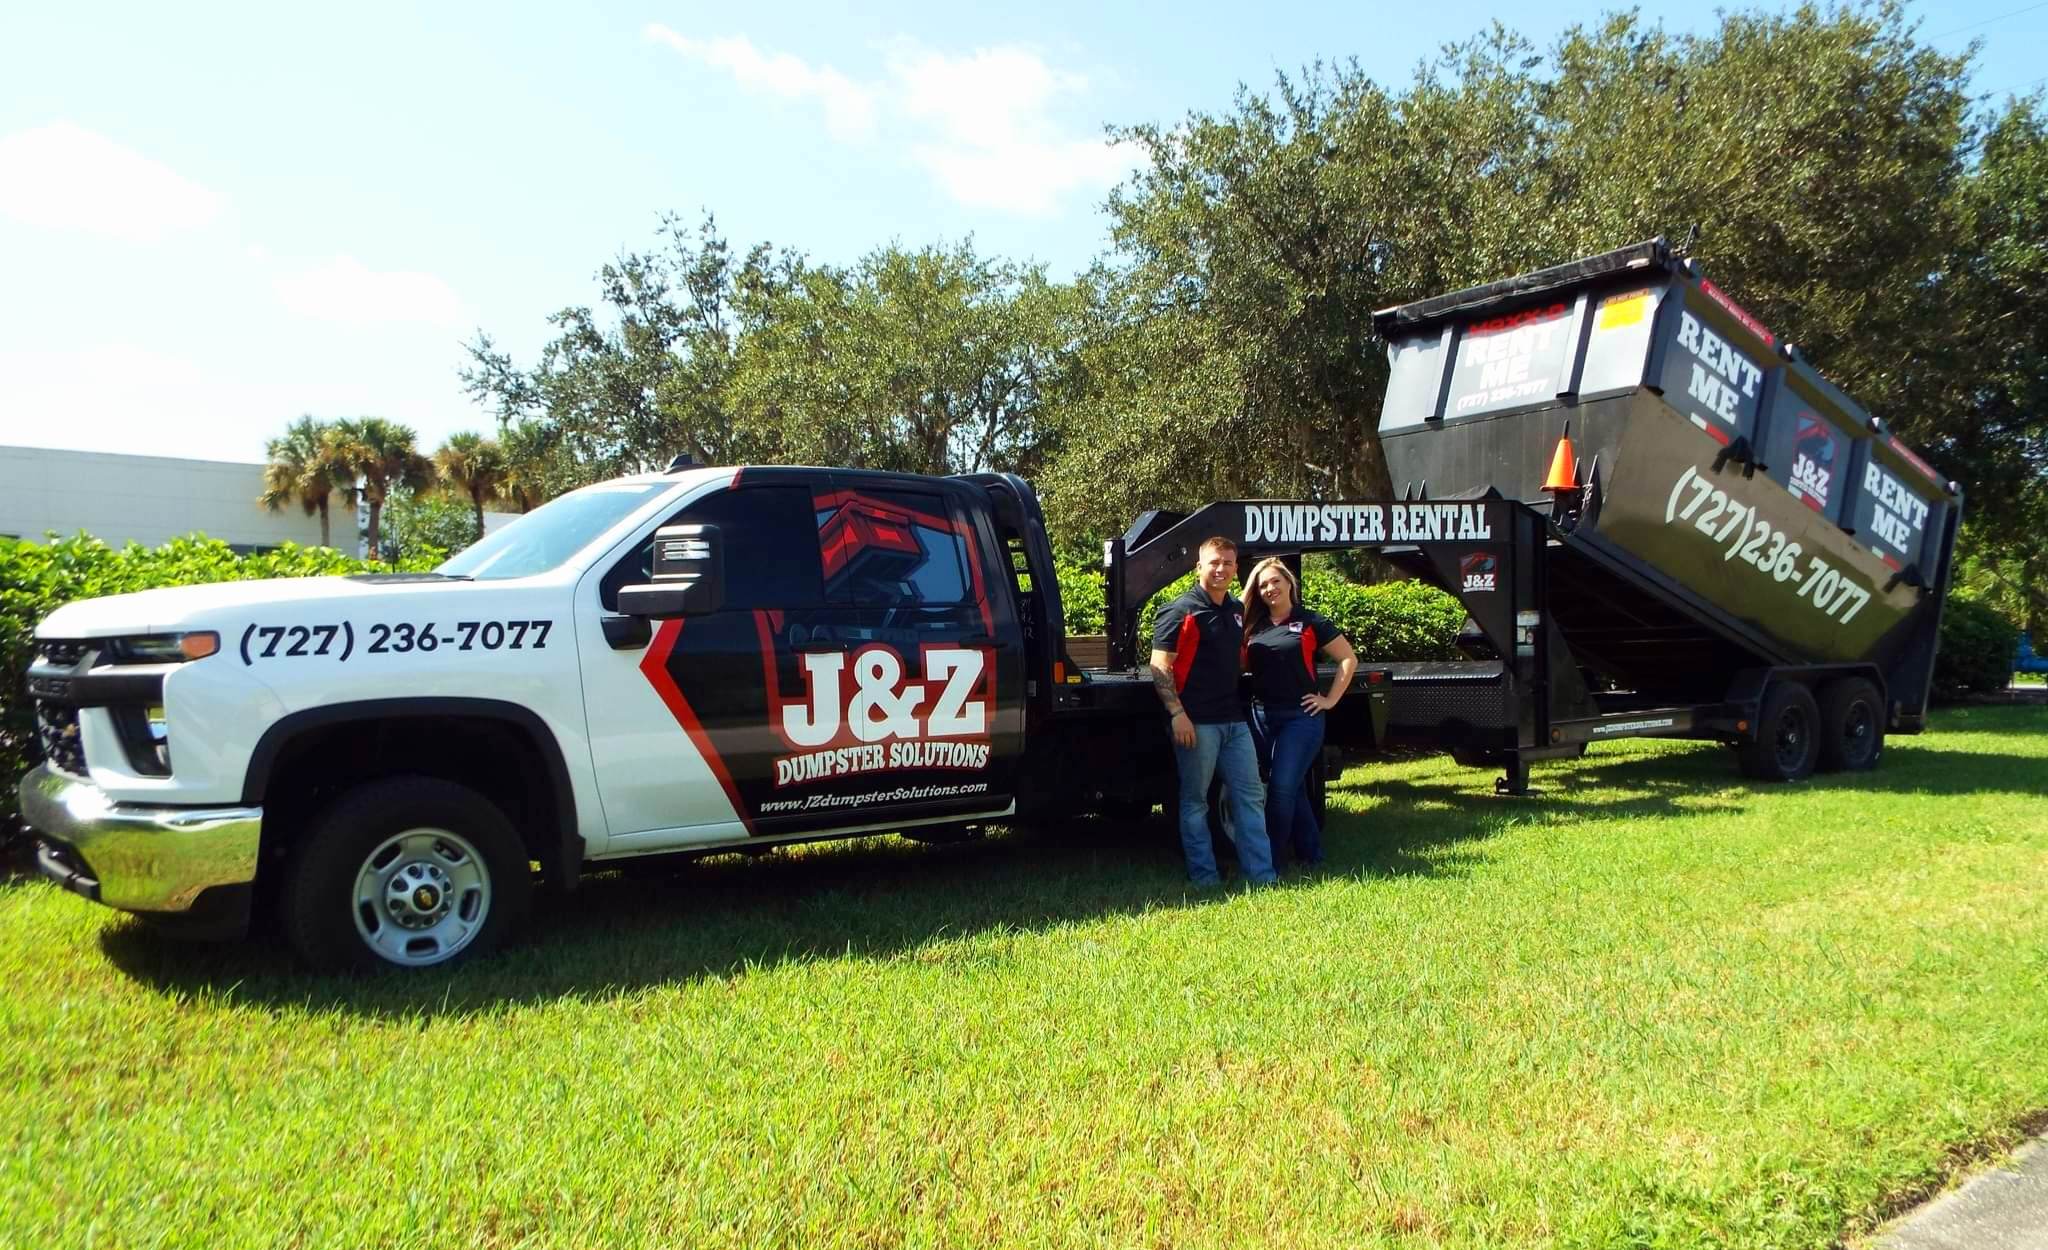 Book the Dumpster Rental Tarpon Springs, FL Contractors and Homeowners Use for All Projects